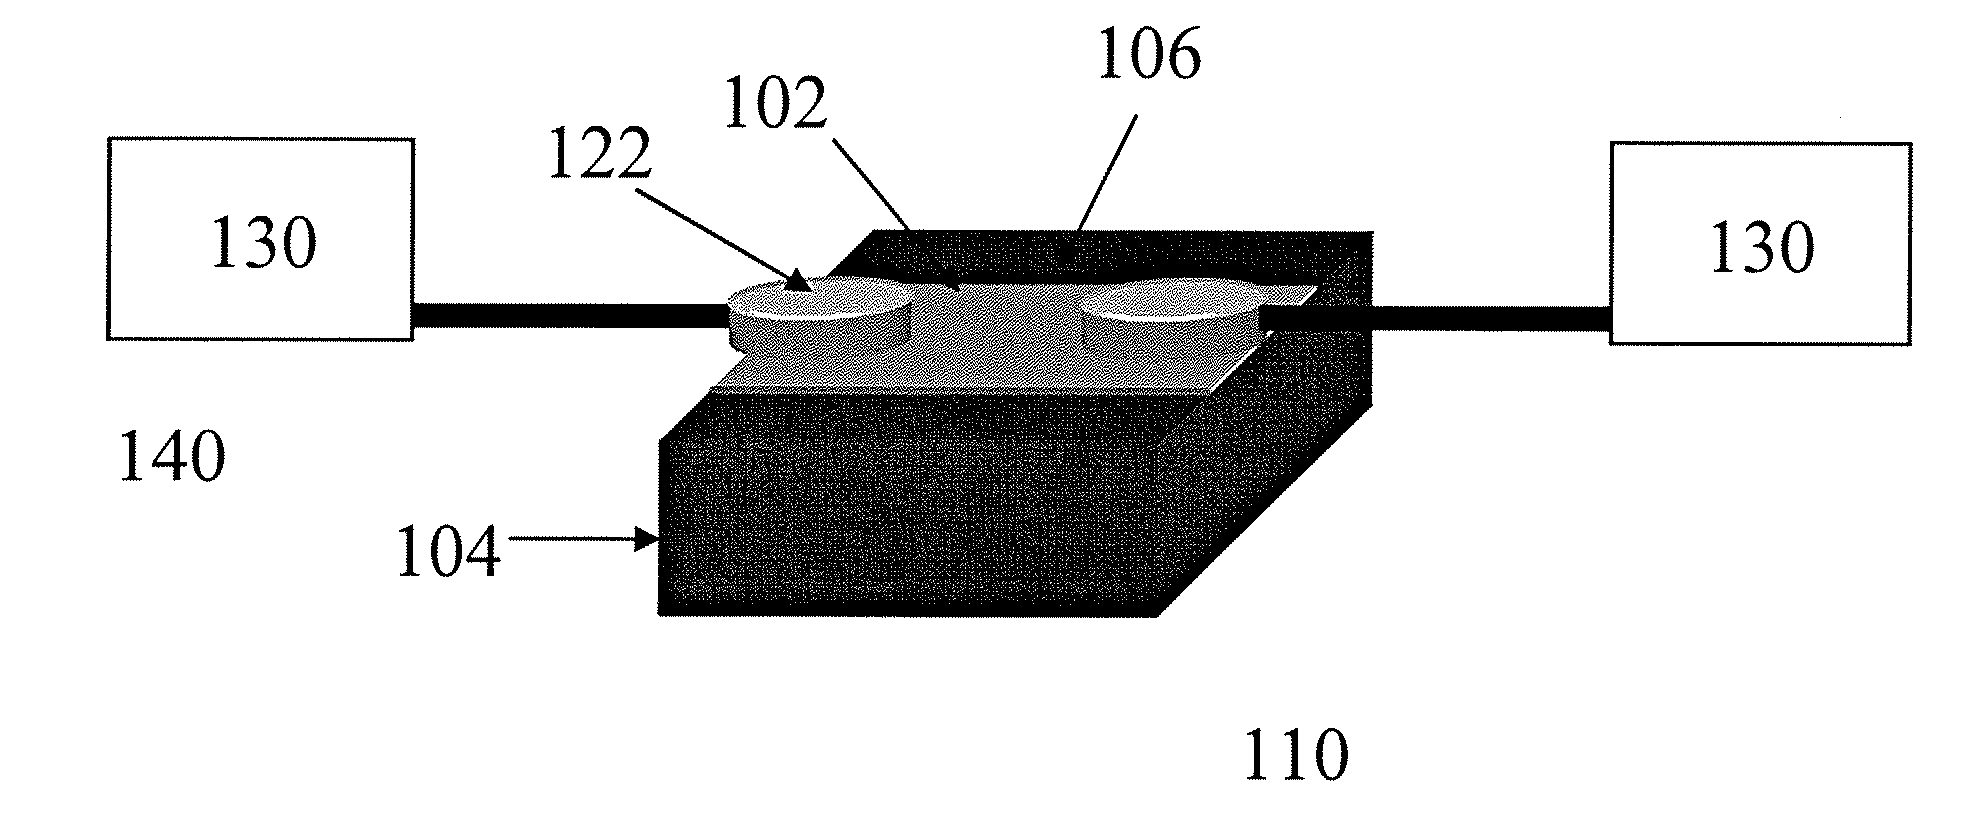 Electromagnetic and Thermal Sensors Using Carbon Nanotubes and Methods of Making Same